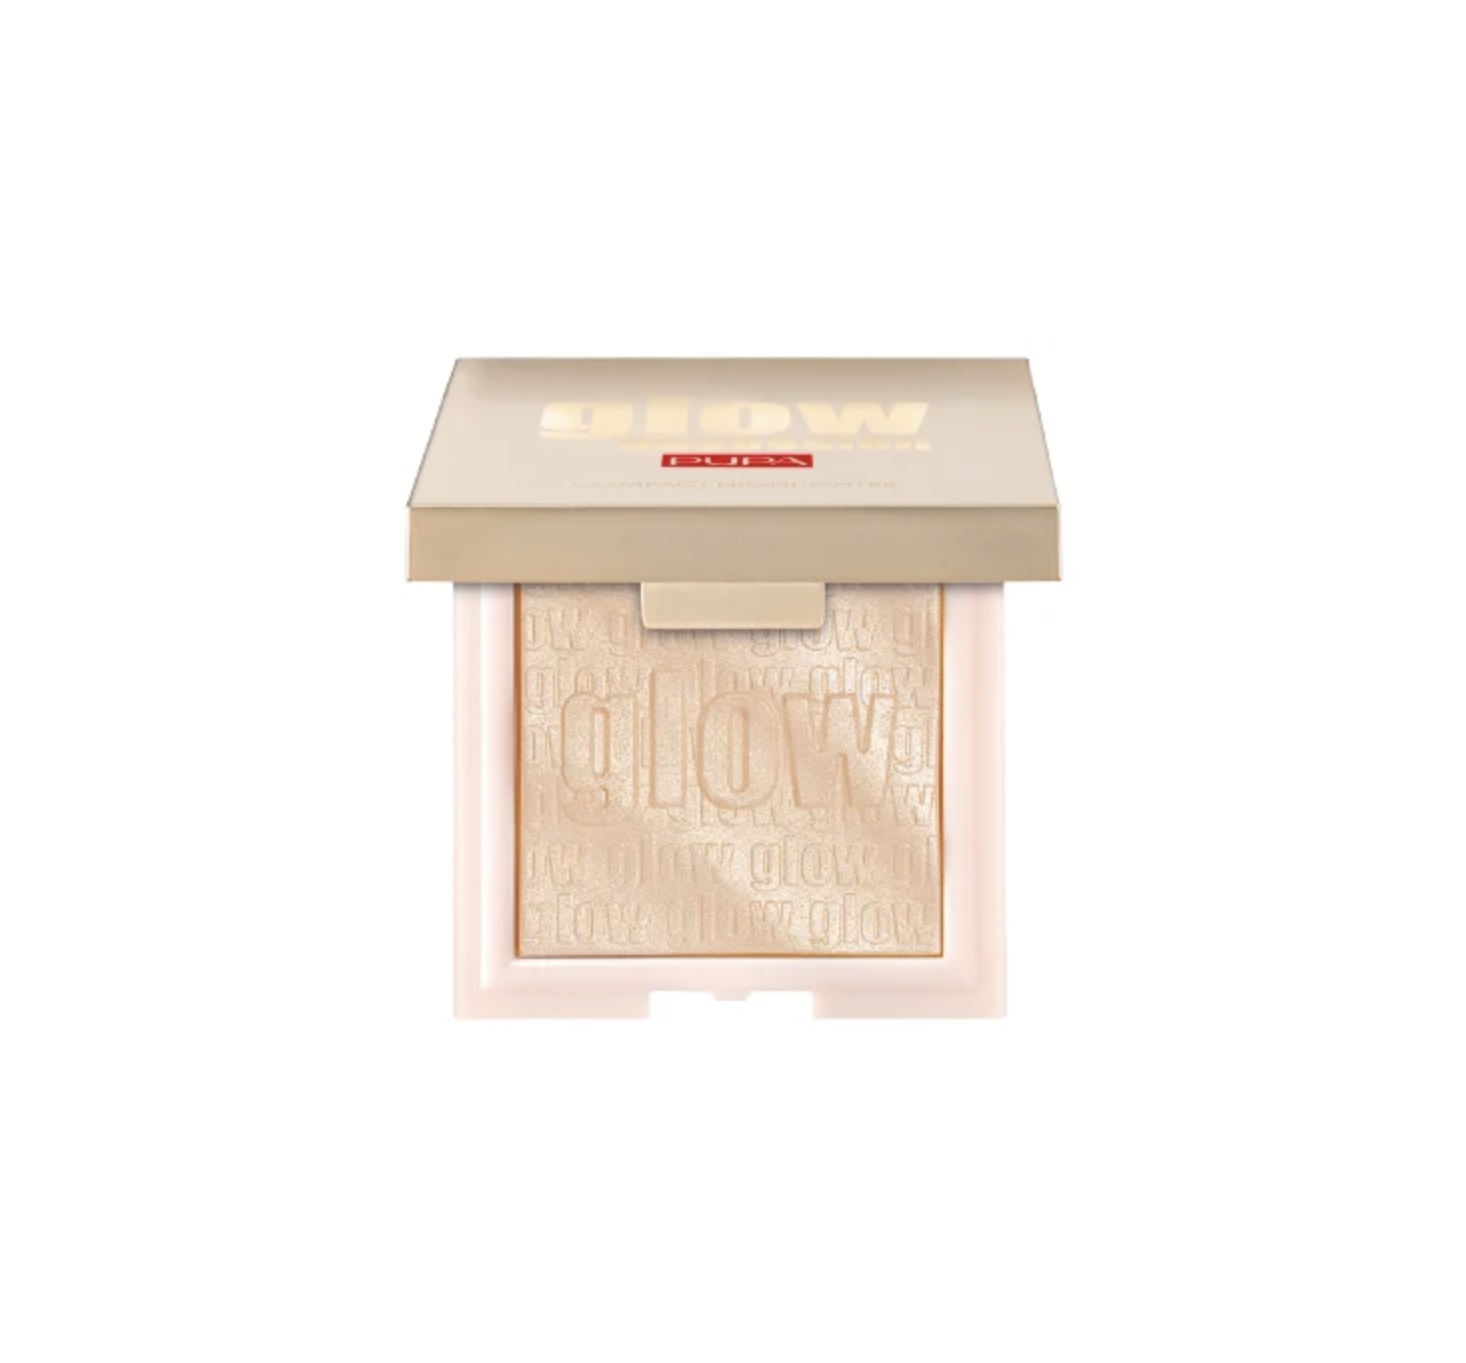   / Pupa -    Glow obsession Compact Highlighter  100 Light Gold 6 